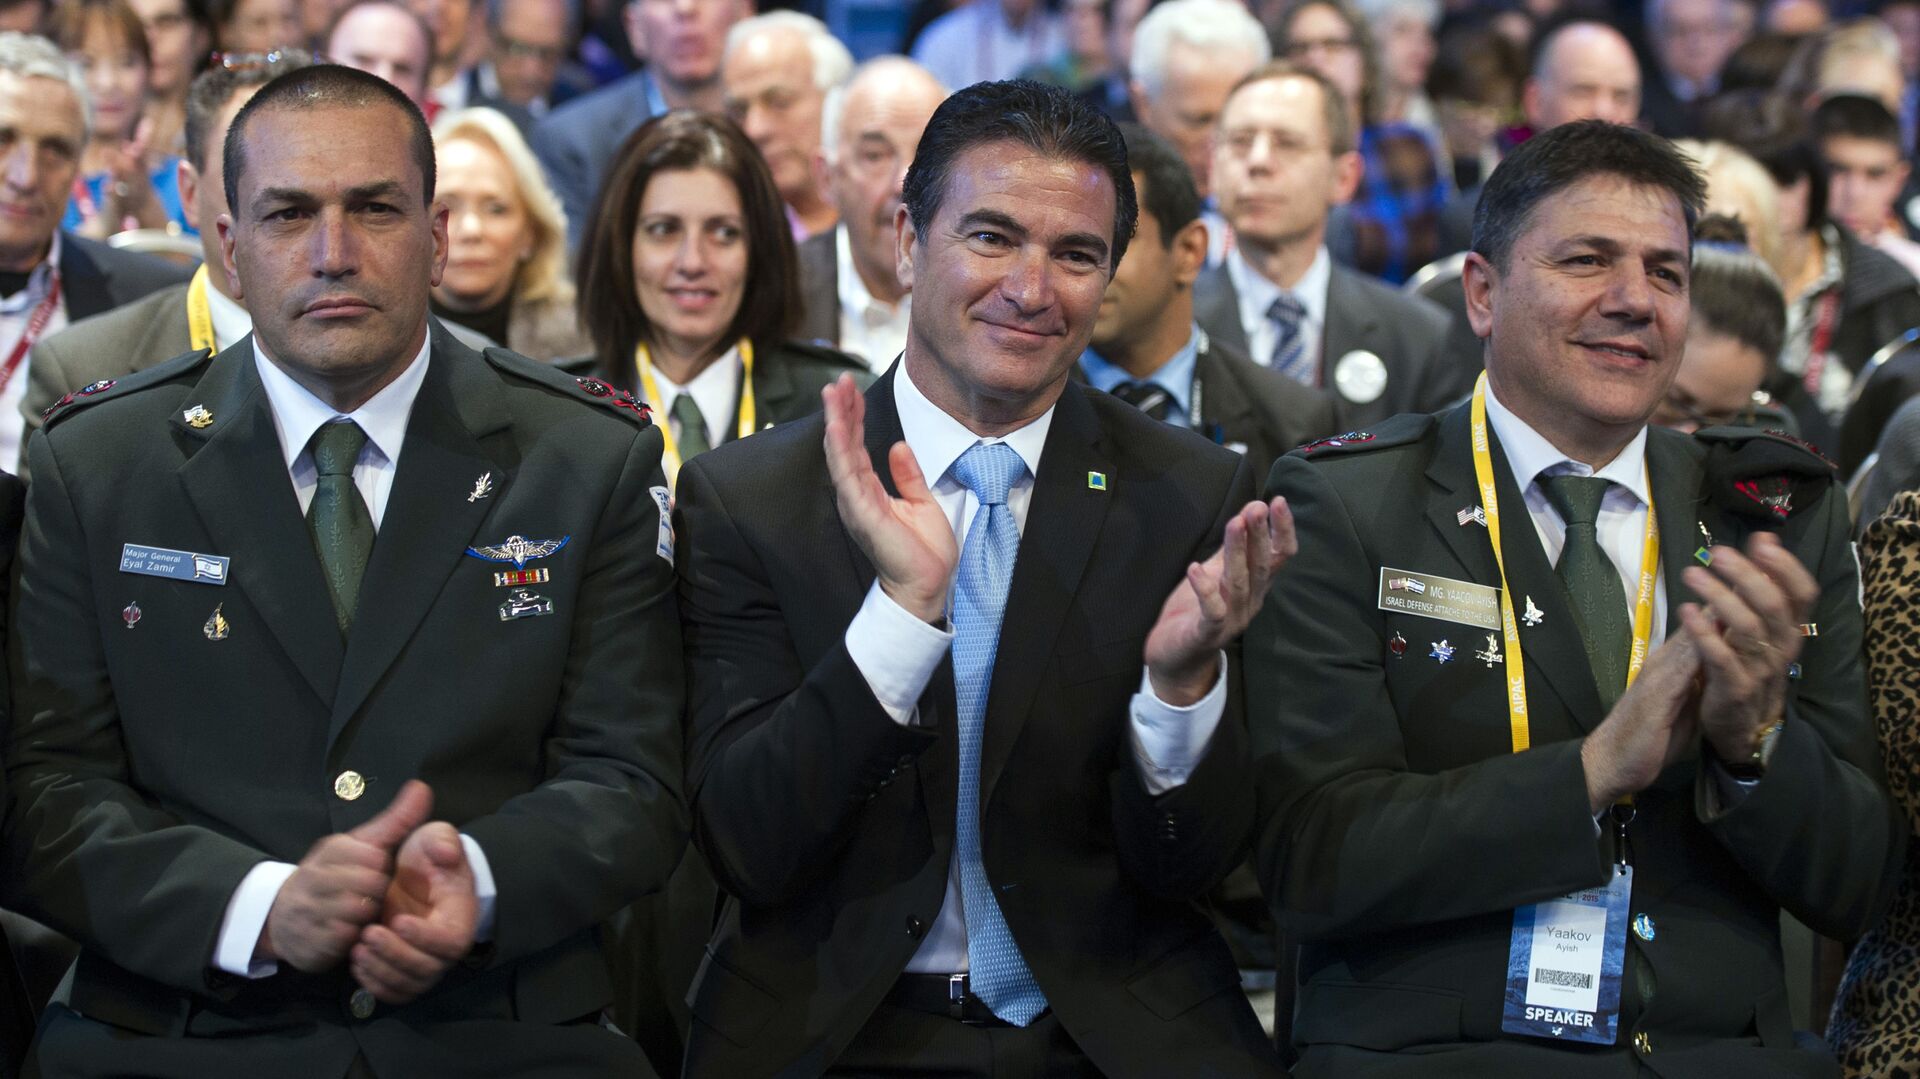 Israeli National Security Adviser Yossi Cohen, center, applauds National Security Adviser Susan Rice as she addresses the 2015 American Israel Public Affairs Committee (AIPAC) Policy Conference in Washington, Monday, March 2, 2015. - Sputnik International, 1920, 30.05.2021